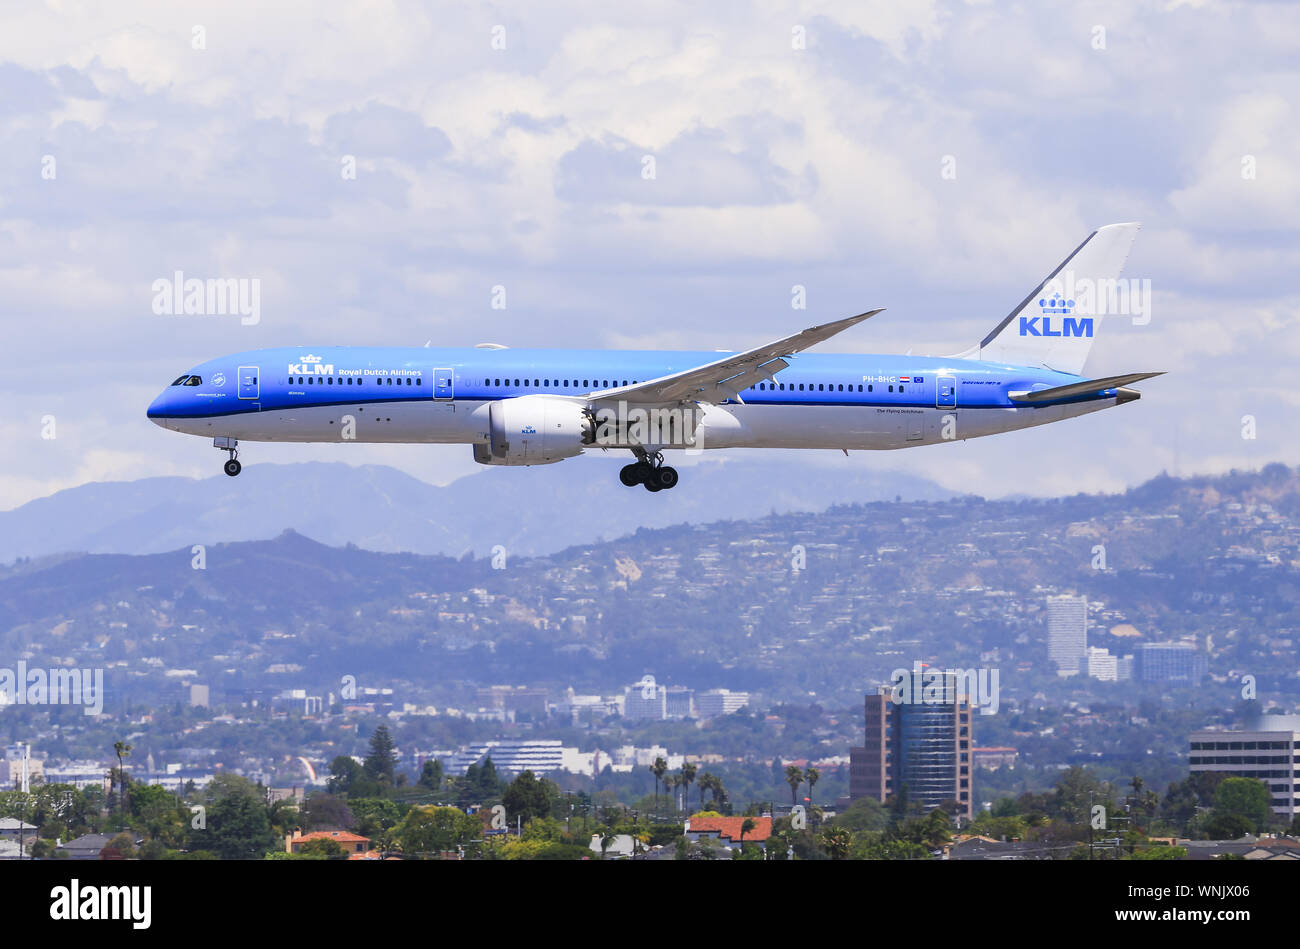 Los Angeles, California, USA - May 22, 2019: A KLM Boeing 787 Dreamliner lands at the Los Angeles International Airport (LAX). Stock Photo